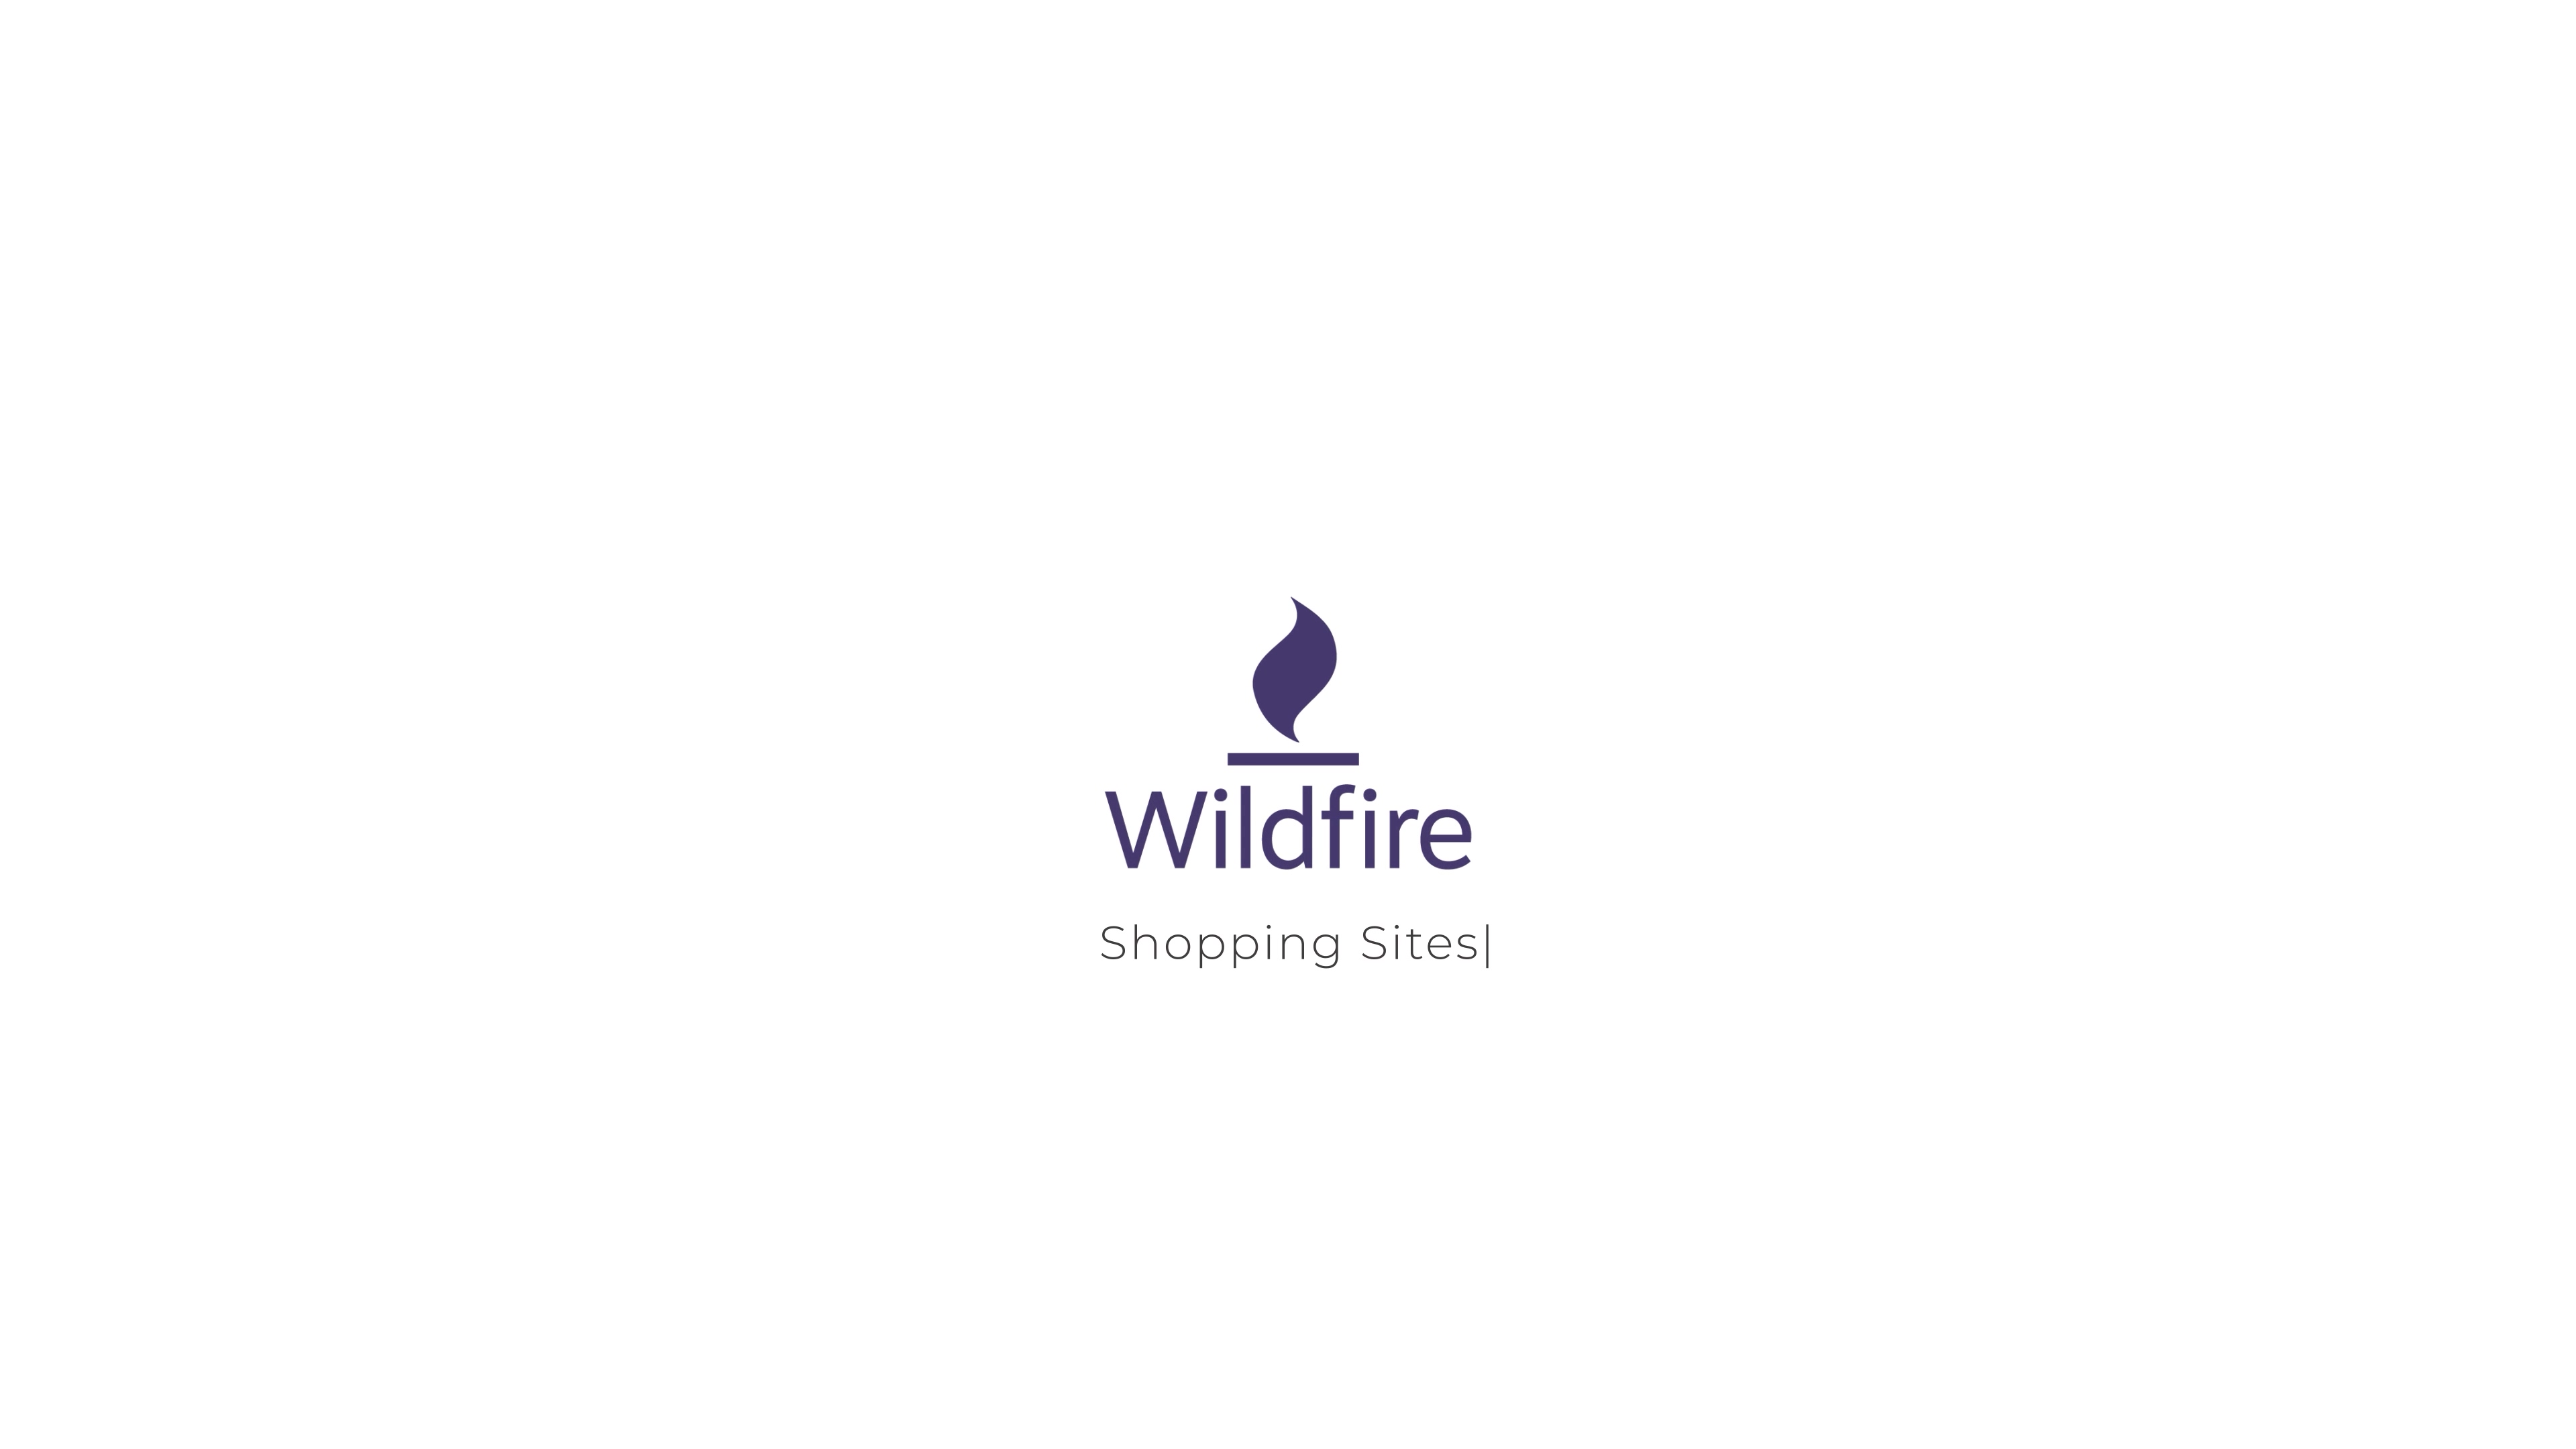 Wildfire | Shopping Sites [no captions]